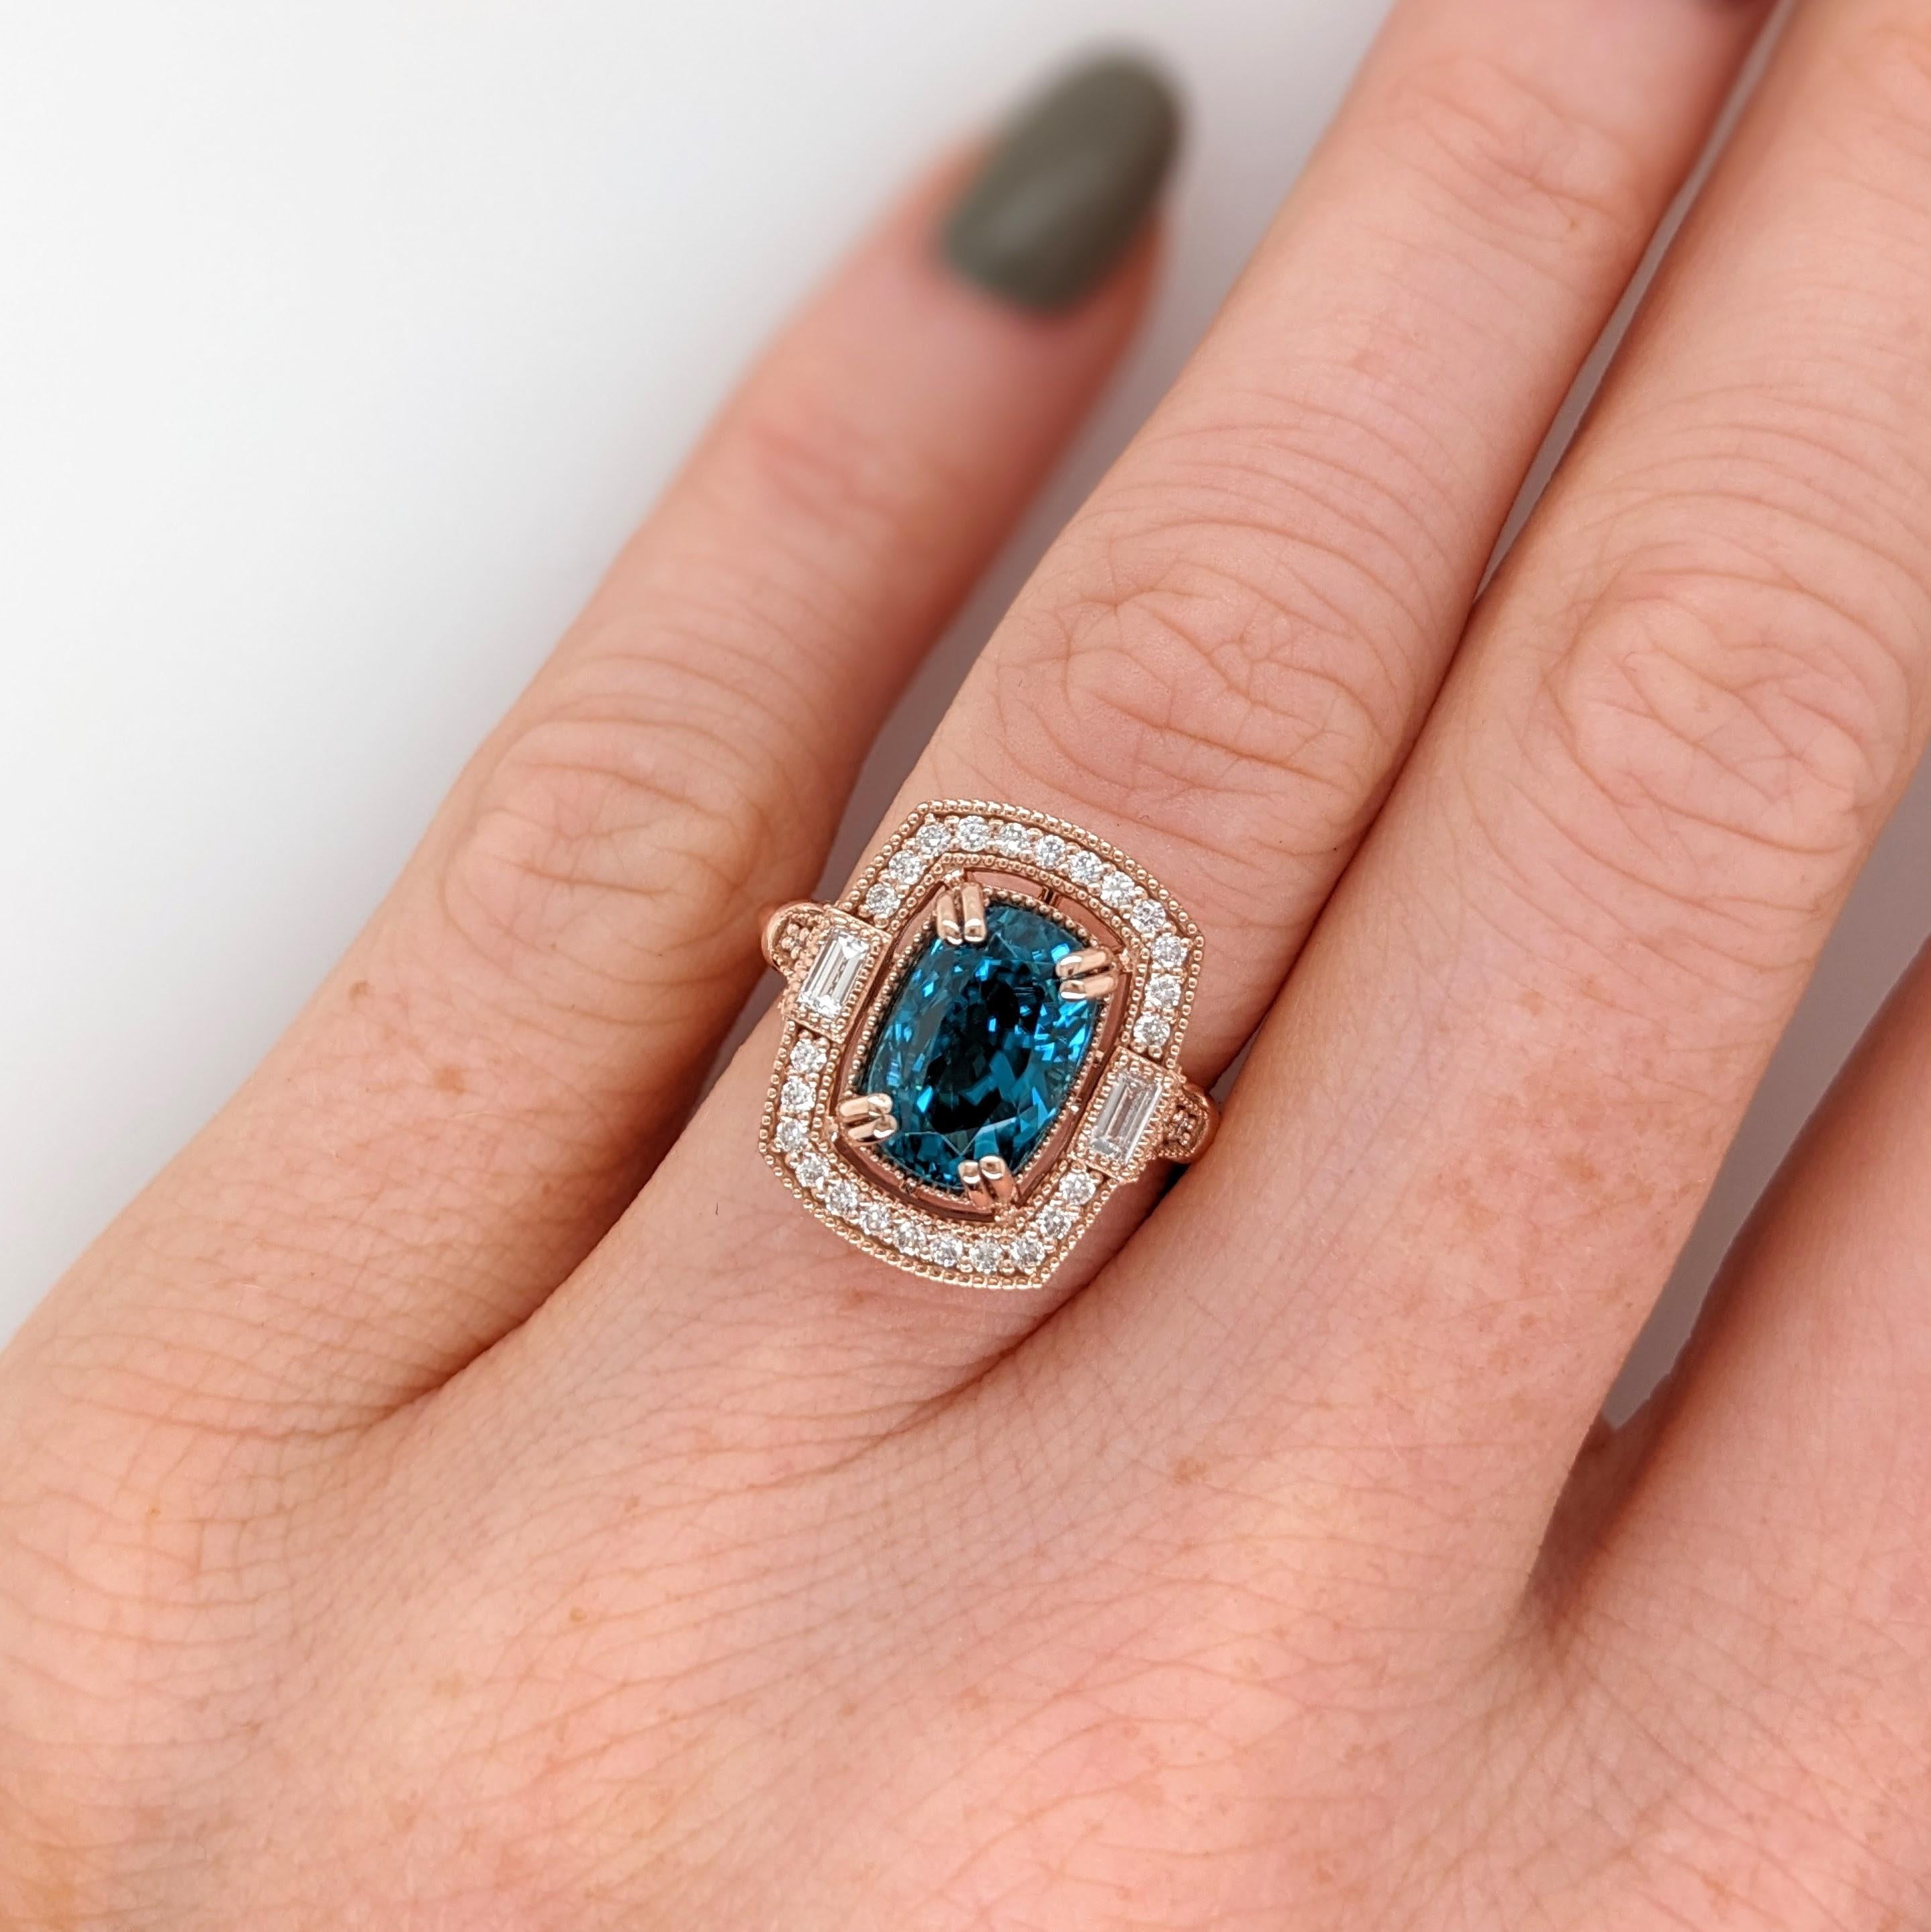 This statement ring features a 5.42 carat cushion cut blue zircon gemstone with natural earth mined diamonds and milgrain detail, all set in solid 14K gold. This ring makes a beautiful December birthstone gift for your loved ones!